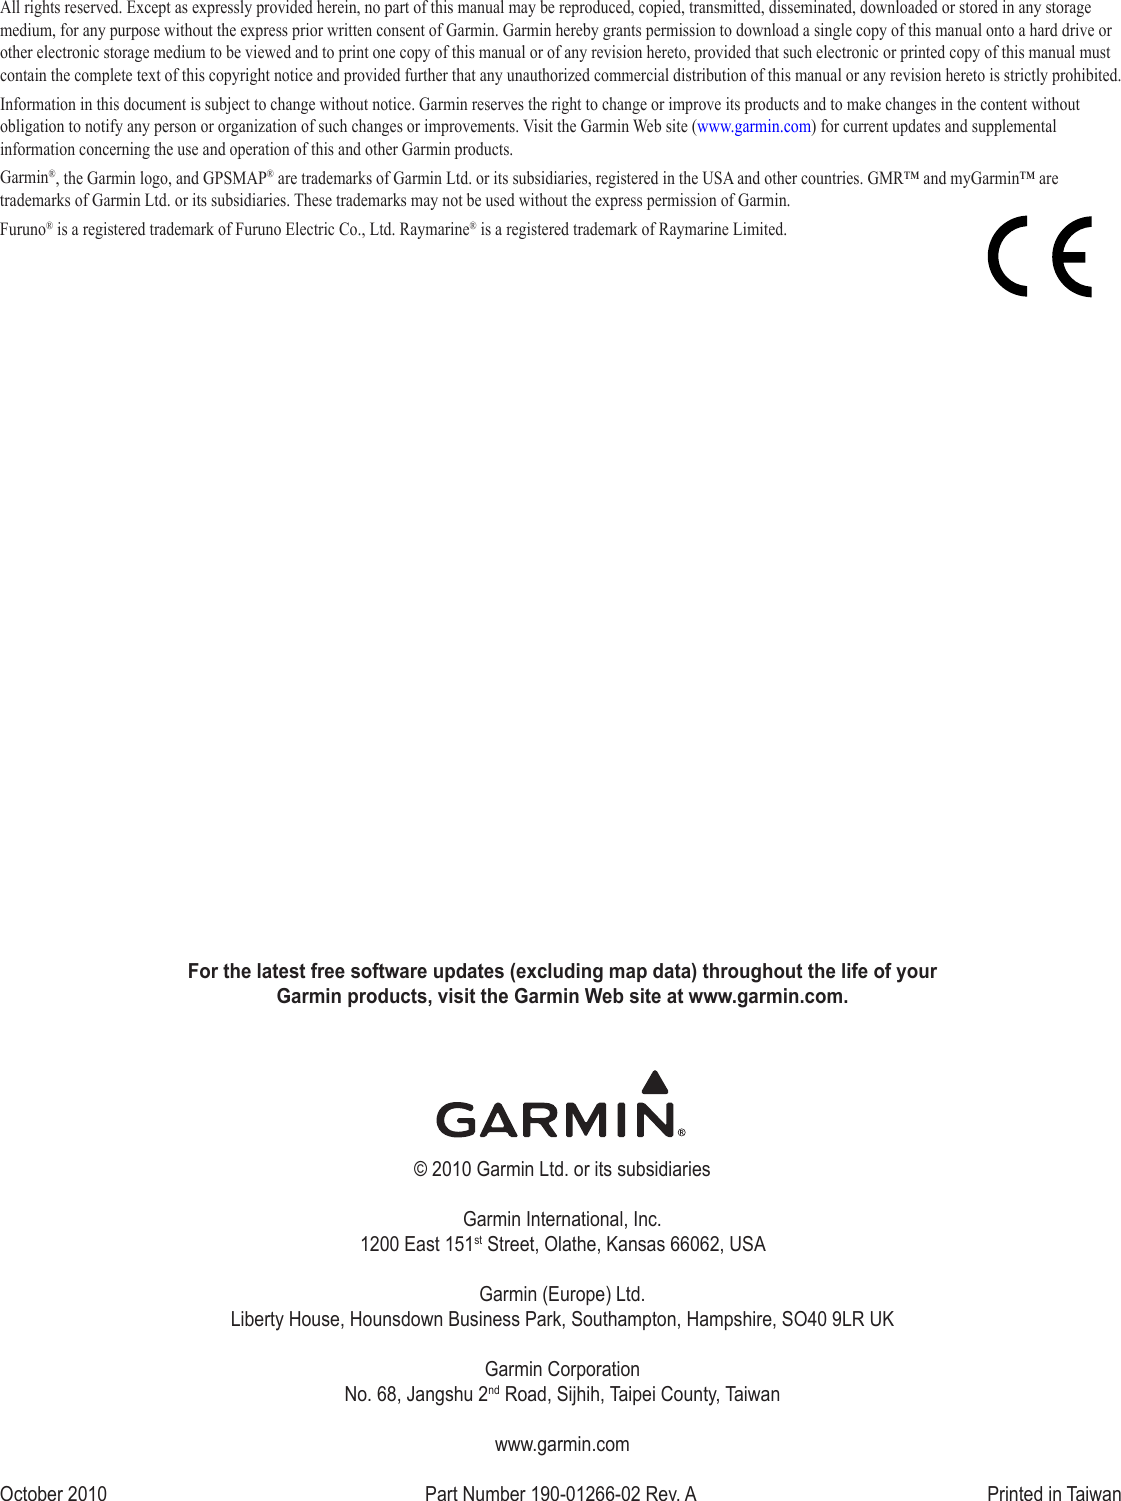 For the latest free software updates (excluding map data) throughout the life of your  Garmin products, visit the Garmin Web site at www.garmin.com.© 2010 Garmin Ltd. or its subsidiariesGarmin International, Inc. 1200 East 151st Street, Olathe, Kansas 66062, USAGarmin (Europe) Ltd. Liberty House, Hounsdown Business Park, Southampton, Hampshire, SO40 9LR UKGarmin Corporation No. 68, Jangshu 2nd Road, Sijhih, Taipei County, Taiwanwww.garmin.comOctober 2010  Part Number 190-01266-02 Rev. A  Printed in TaiwanAll rights reserved. Except as expressly provided herein, no part of this manual may be reproduced, copied, transmitted, disseminated, downloaded or stored in any storage medium, for any purpose without the express prior written consent of Garmin. Garmin hereby grants permission to download a single copy of this manual onto a hard drive or other electronic storage medium to be viewed and to print one copy of this manual or of any revision hereto, provided that such electronic or printed copy of this manual must contain the complete text of this copyright notice and provided further that any unauthorized commercial distribution of this manual or any revision hereto is strictly prohibited.Information in this document is subject to change without notice. Garmin reserves the right to change or improve its products and to make changes in the content without obligation to notify any person or organization of such changes or improvements. Visit the Garmin Web site (www.garmin.com) for current updates and supplemental information concerning the use and operation of this and other Garmin products.Garmin®, the Garmin logo, and GPSMAP® are trademarks of Garmin Ltd. or its subsidiaries, registered in the USA and other countries. GMR™ and myGarmin™ are trademarks of Garmin Ltd. or its subsidiaries. These trademarks may not be used without the express permission of Garmin.Furuno® is a registered trademark of Furuno Electric Co., Ltd. Raymarine® is a registered trademark of Raymarine Limited.